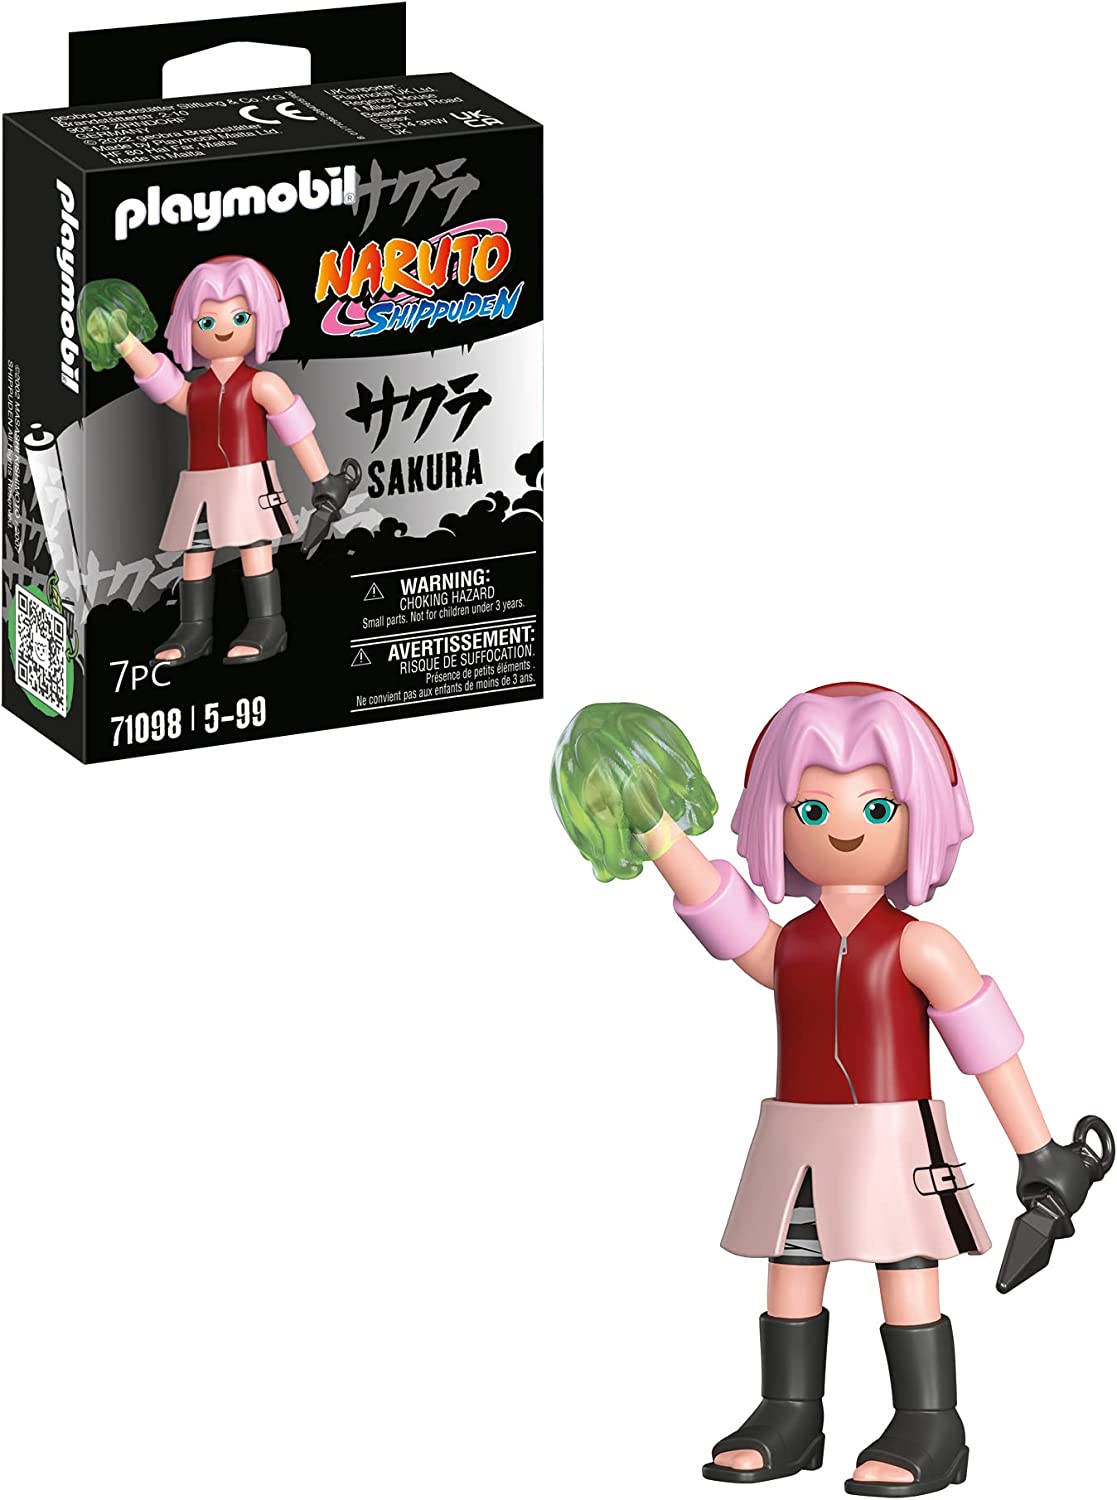 Playmobil Naruto Shippuden 71098 Sakura with Kunai and Healing Glove, Creative Fun for Anime Fans With Great Details and Authentic Extras, 7 Pieces, From 5 Years